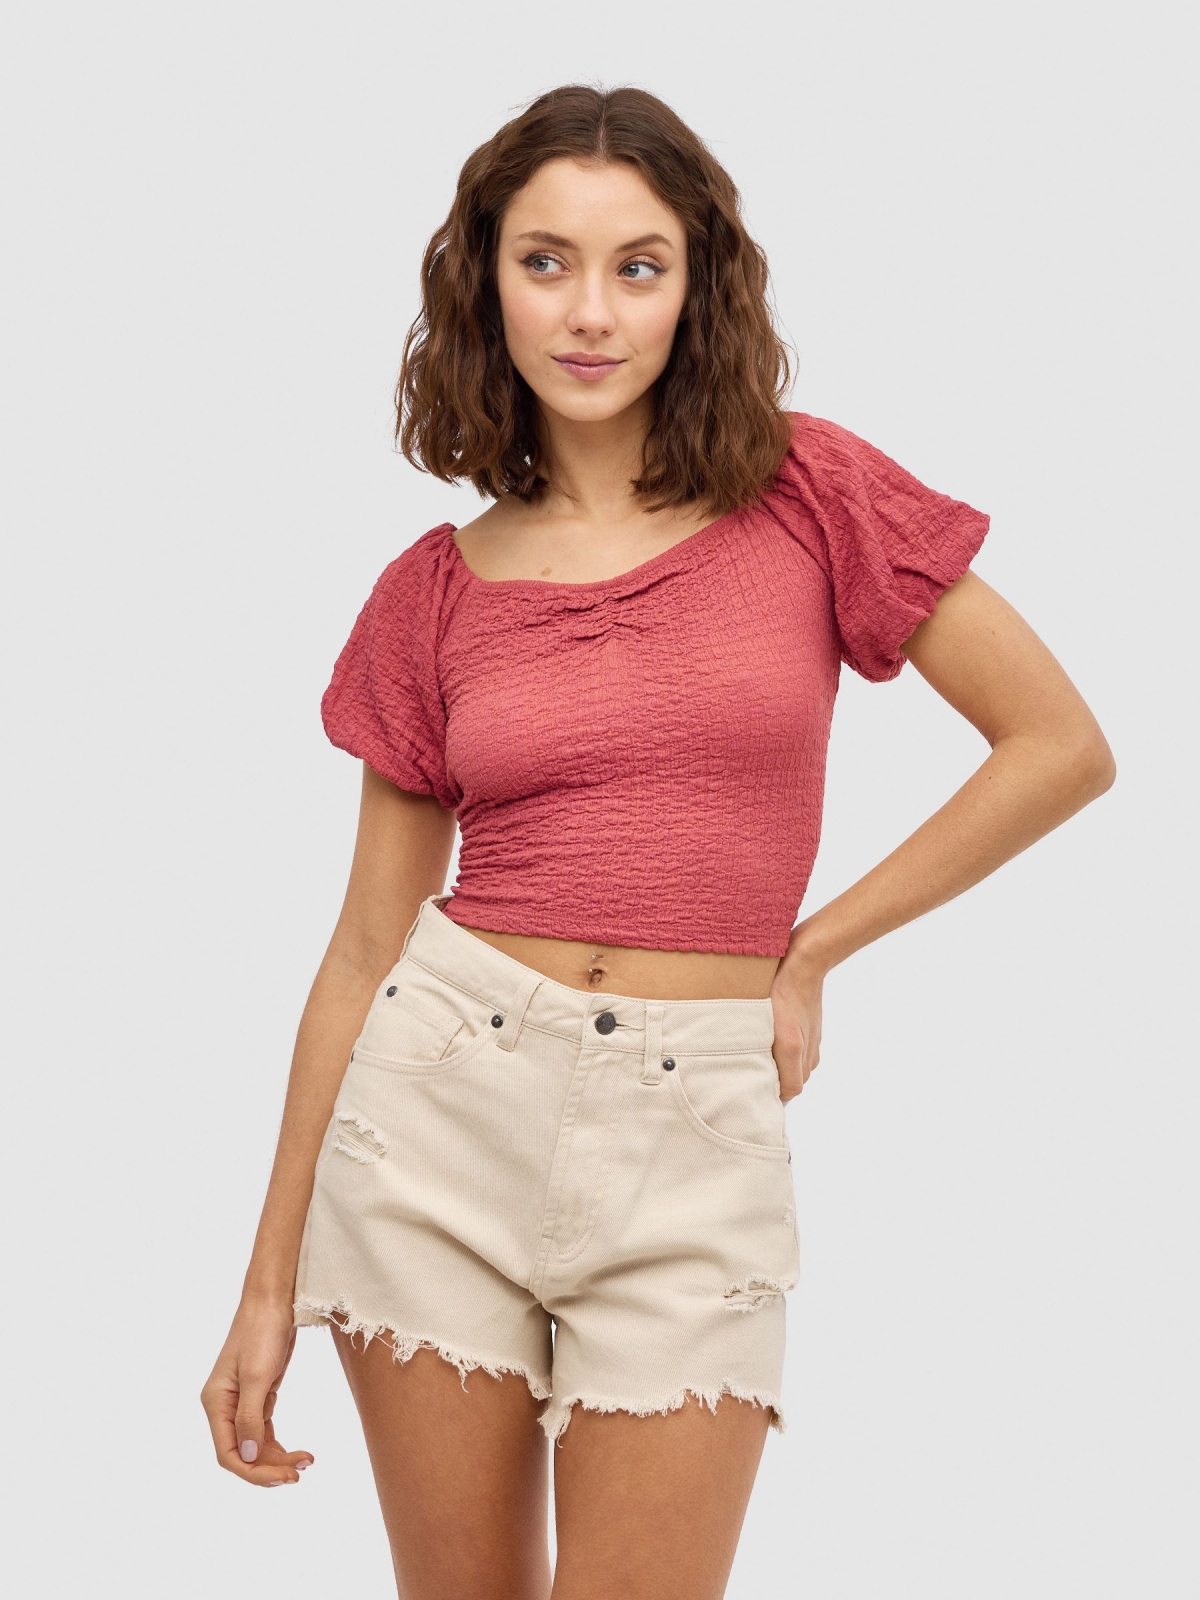 Flared shorts sand middle front view